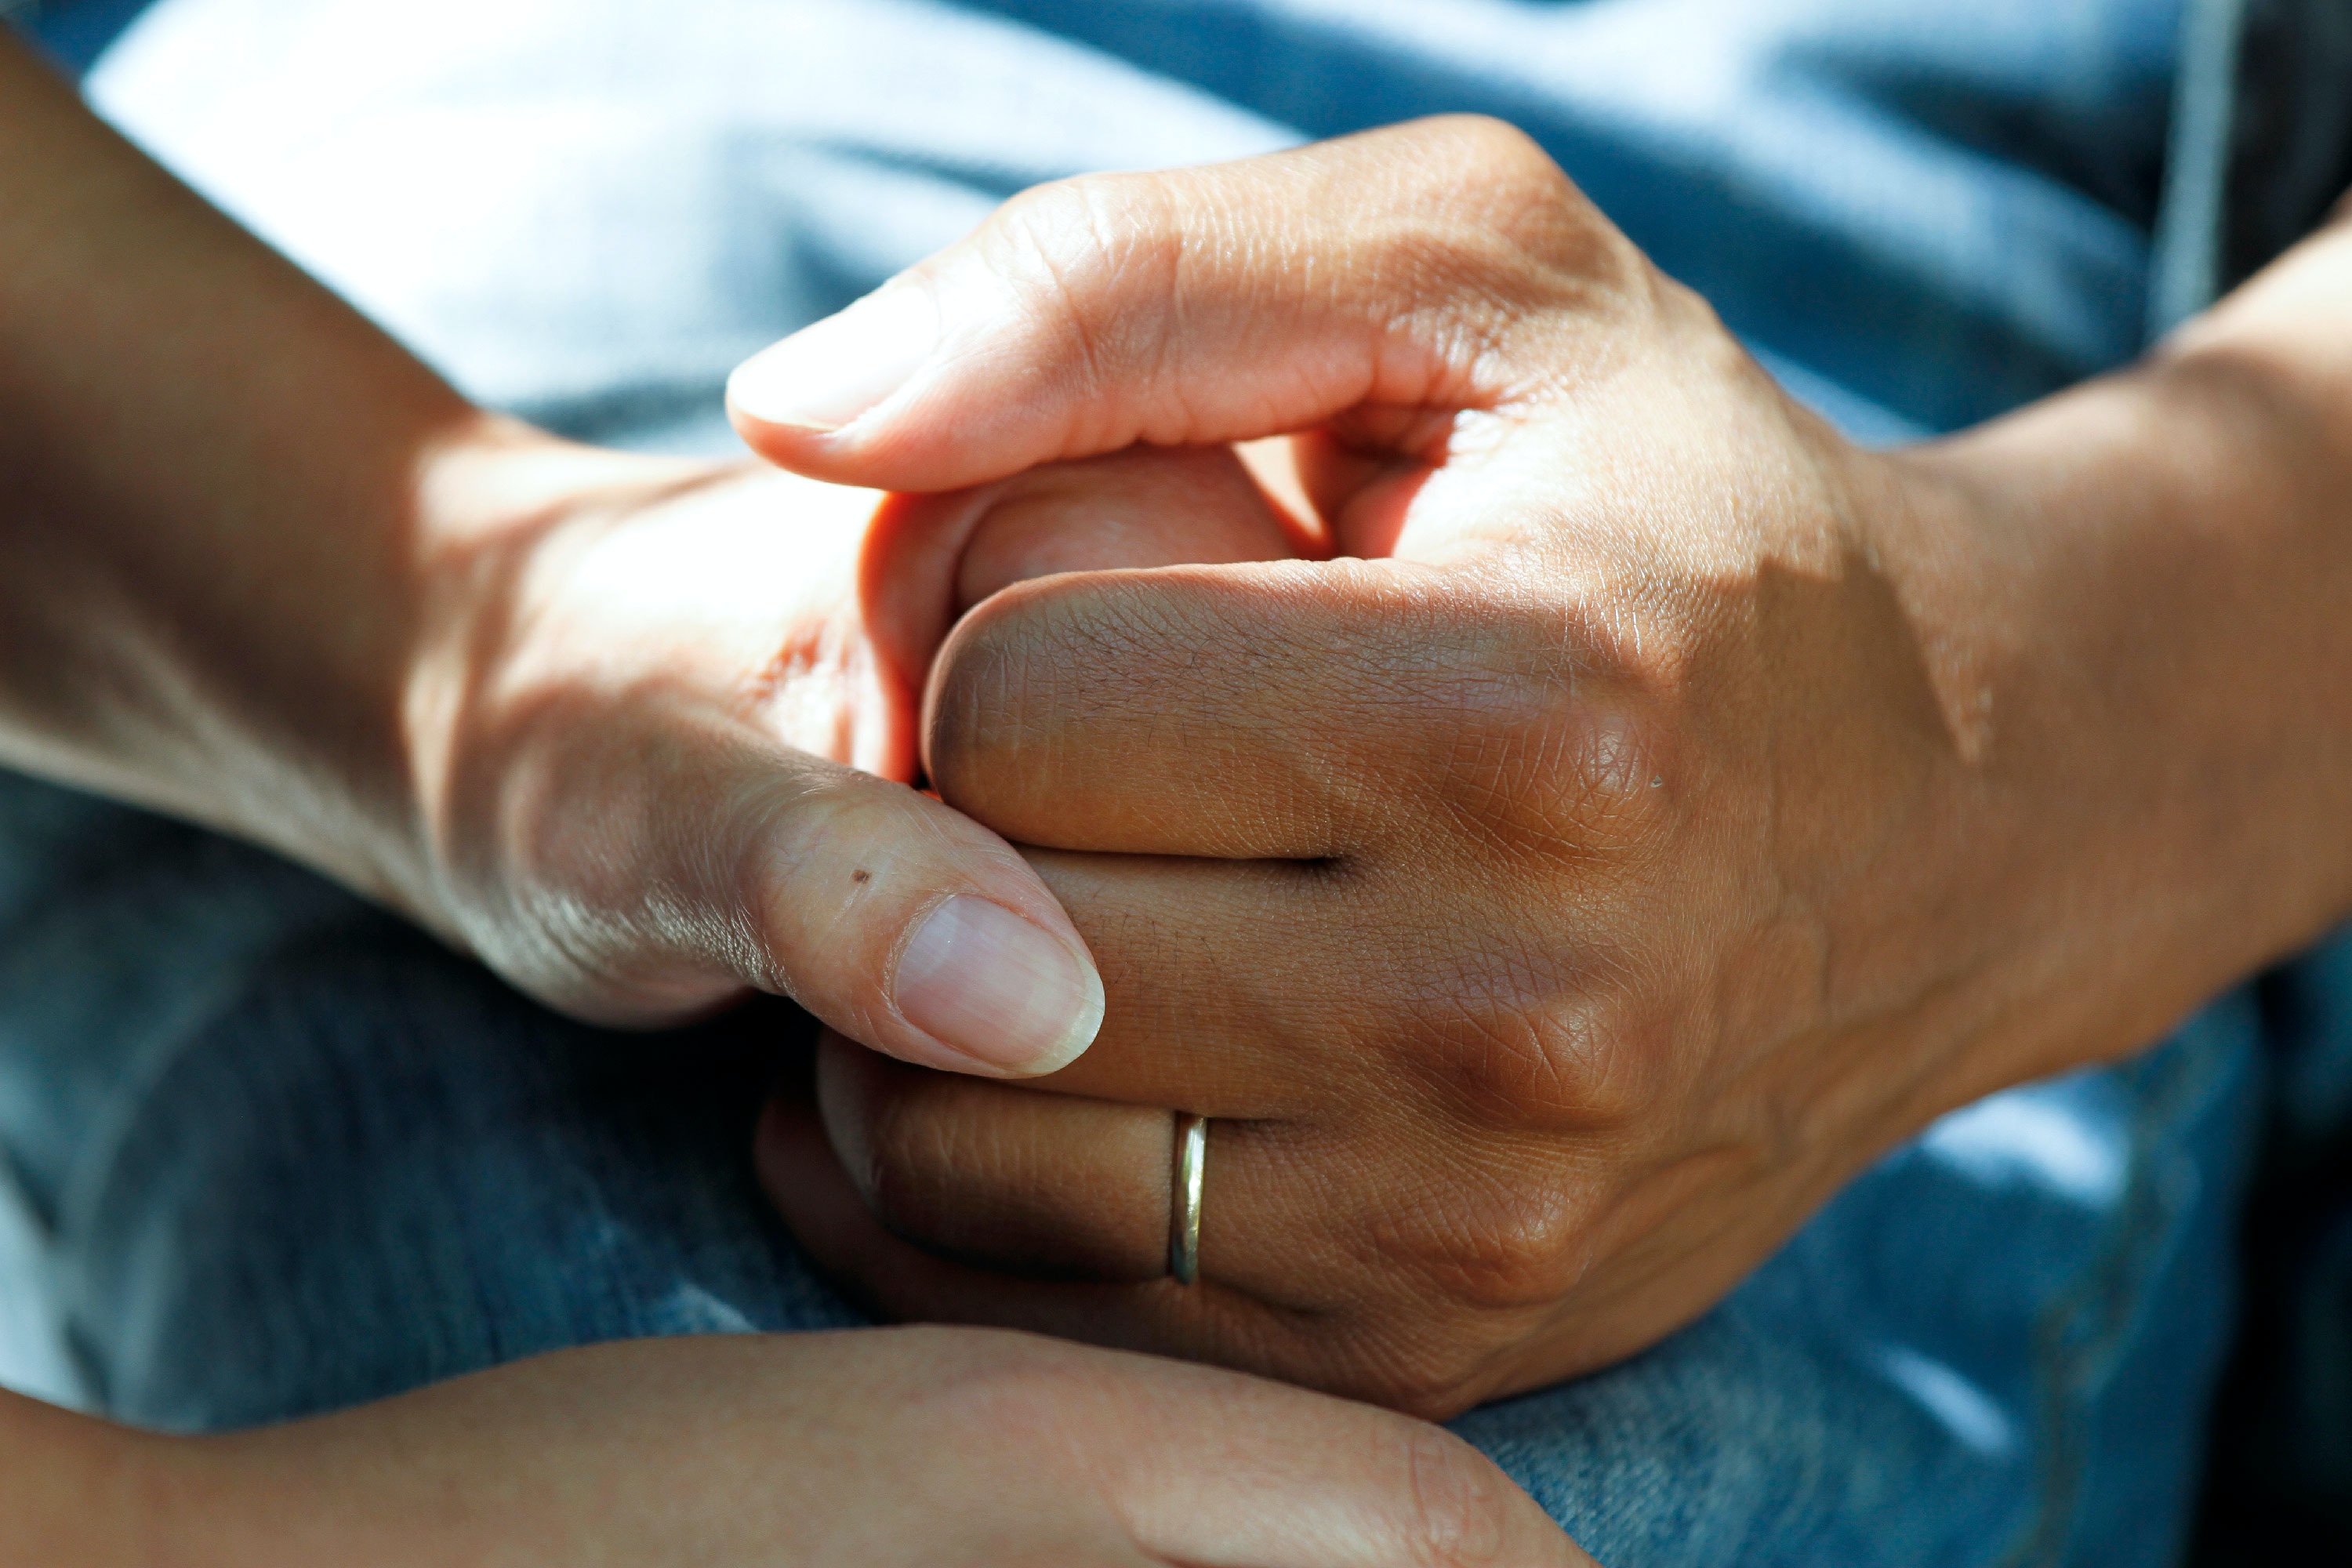 Hands held in social care setting.